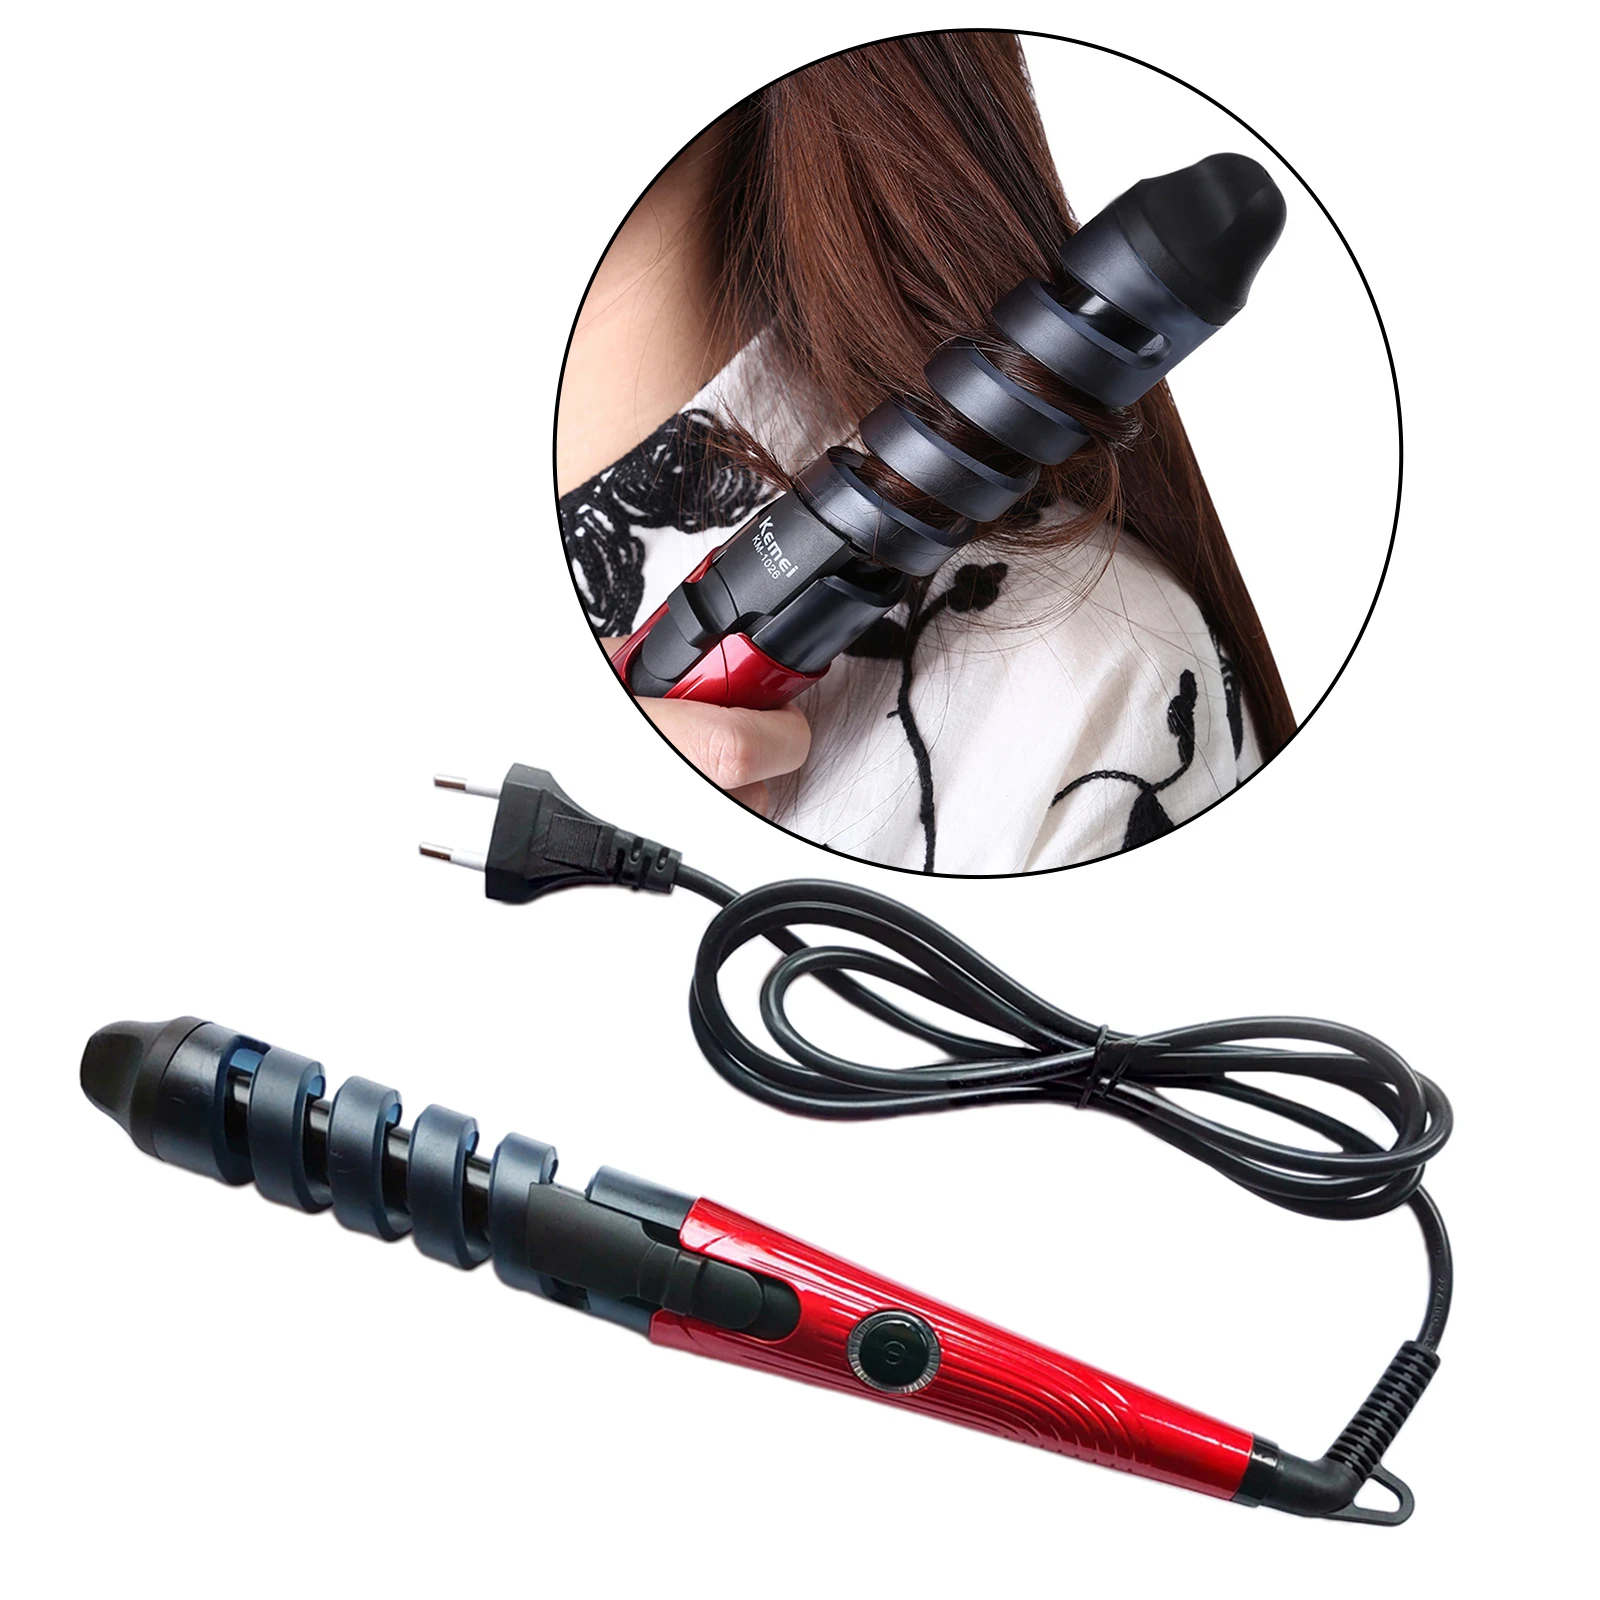 Pro Heating Hairdressing Hair Curlers Curling Wand Rod for All Hair Types Iron Curling Tongs Crimping Styling